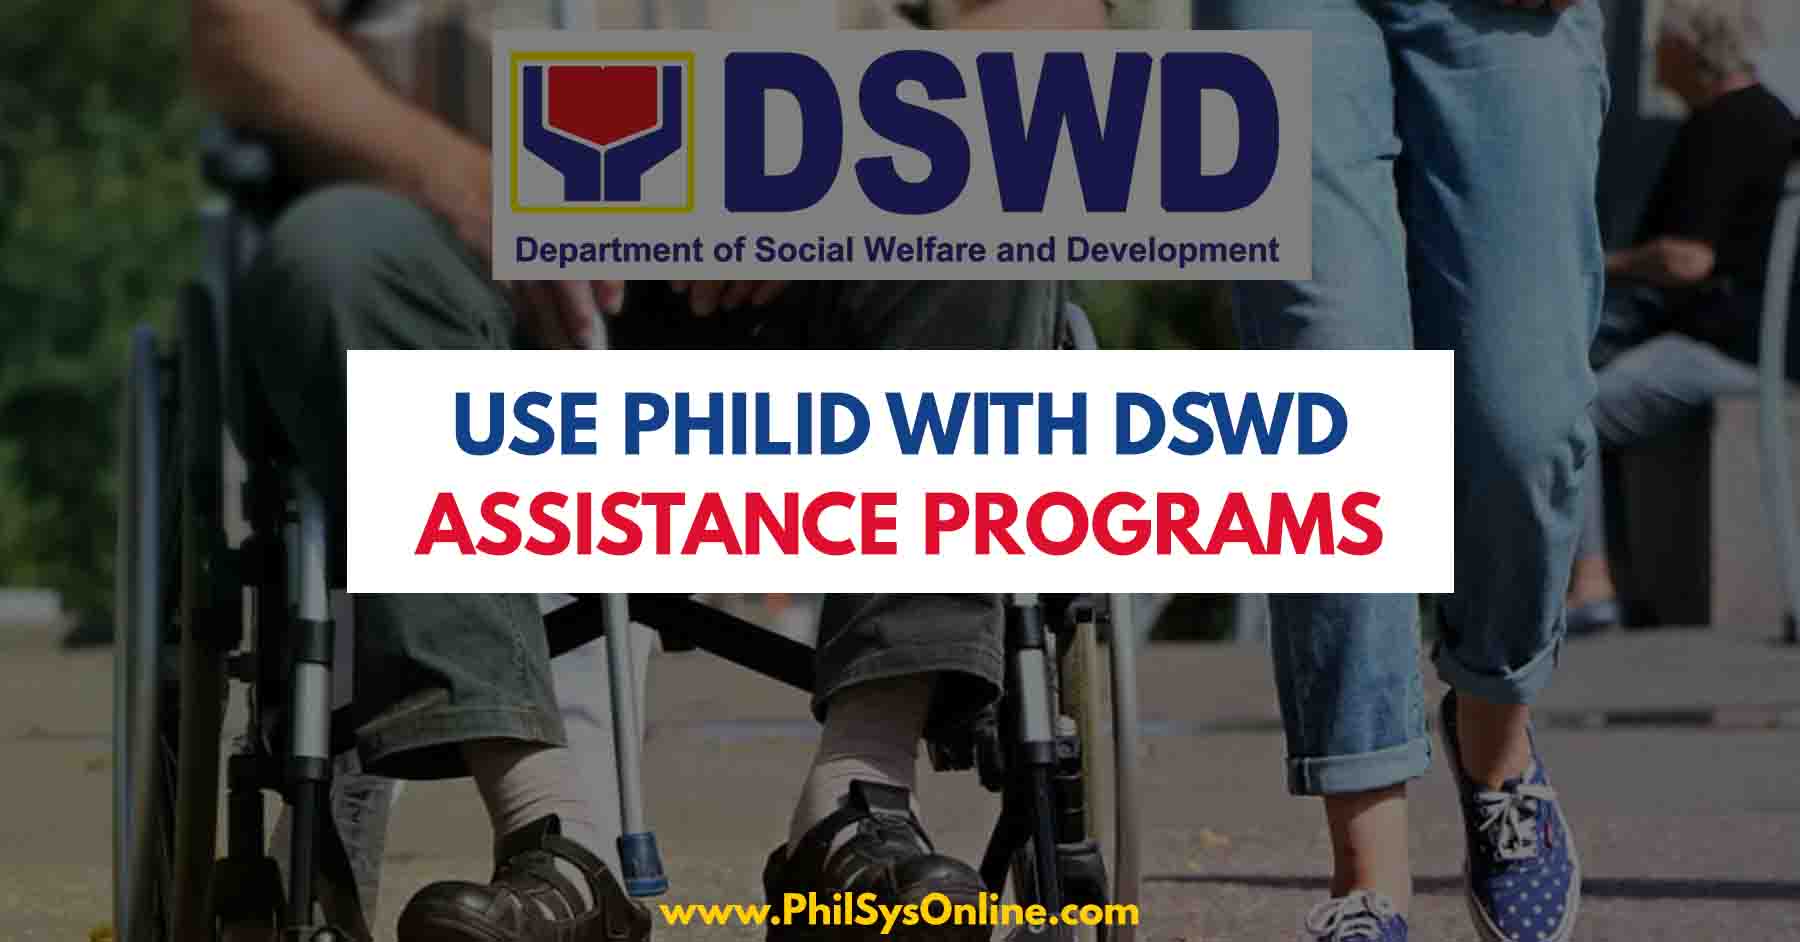 use phil id with dswd assistance programs